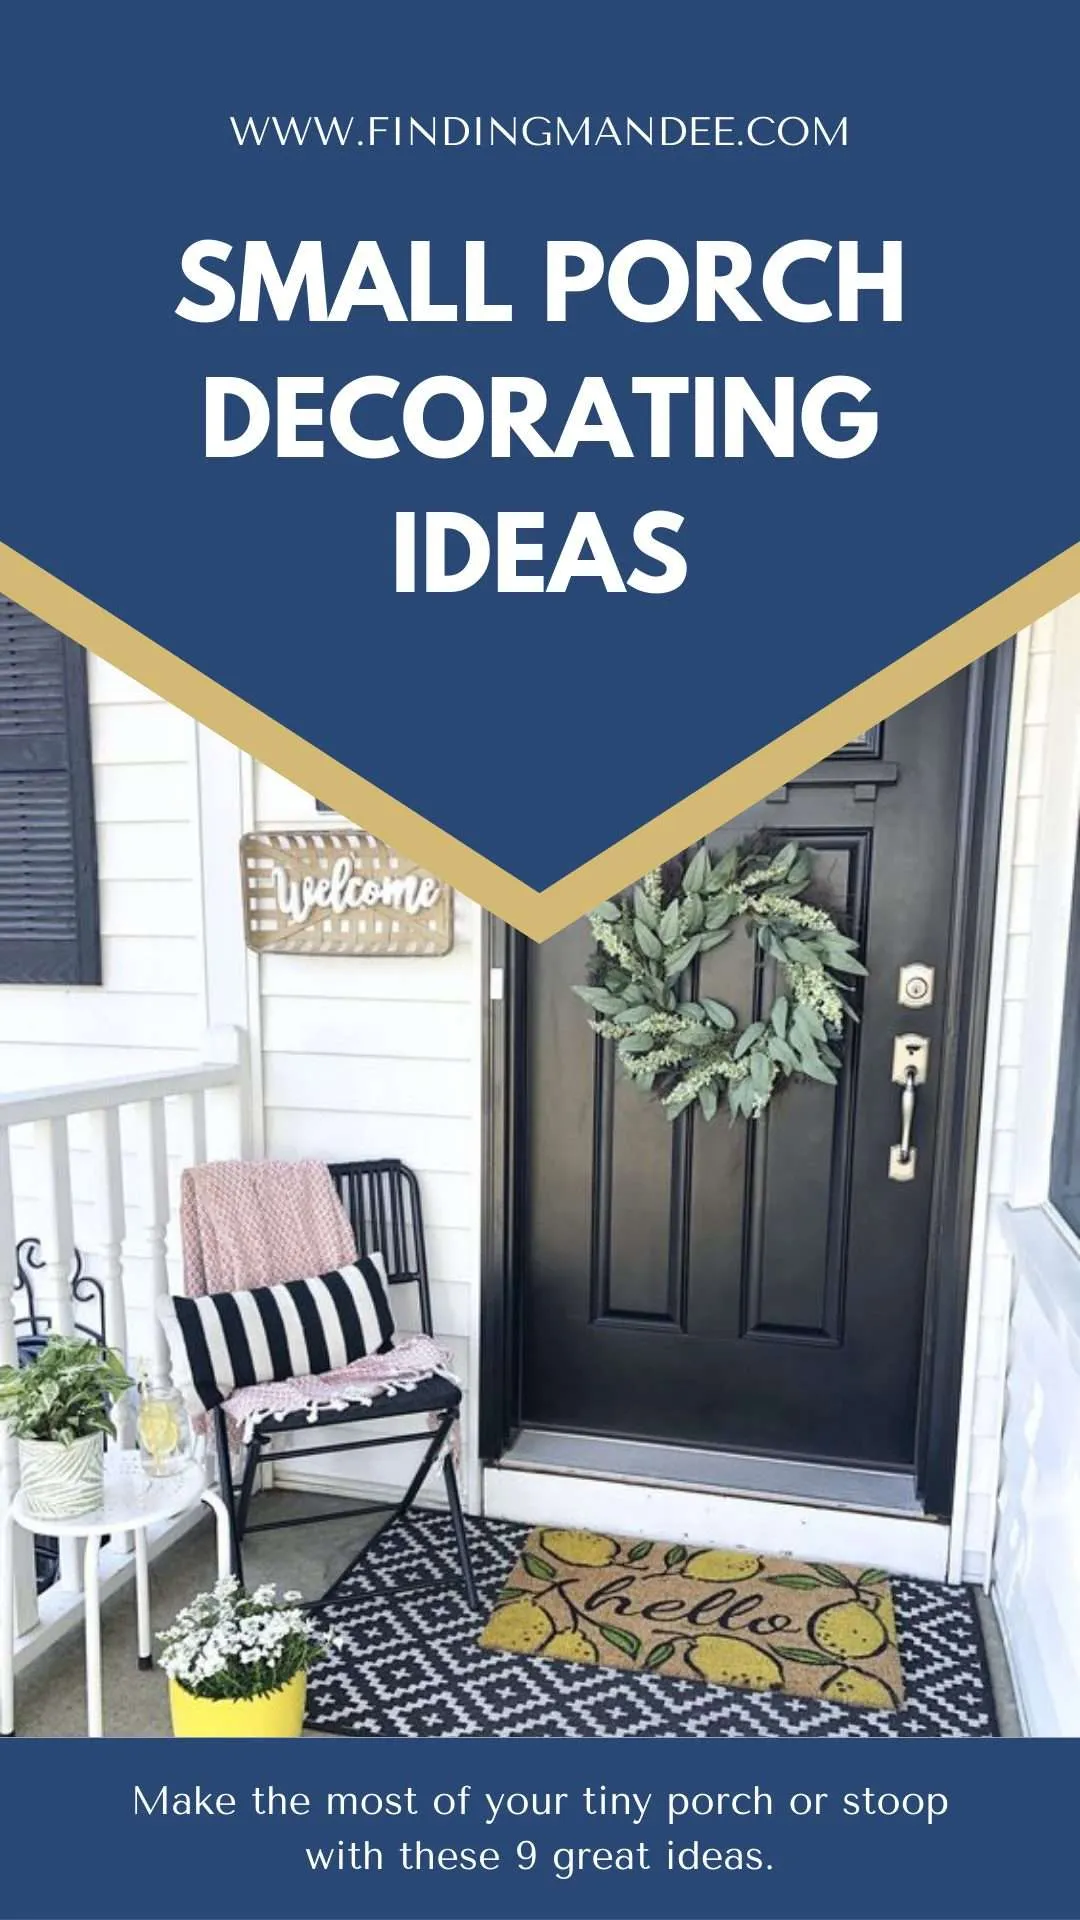 Small Porch Decorating Ideas | Finding Mandee